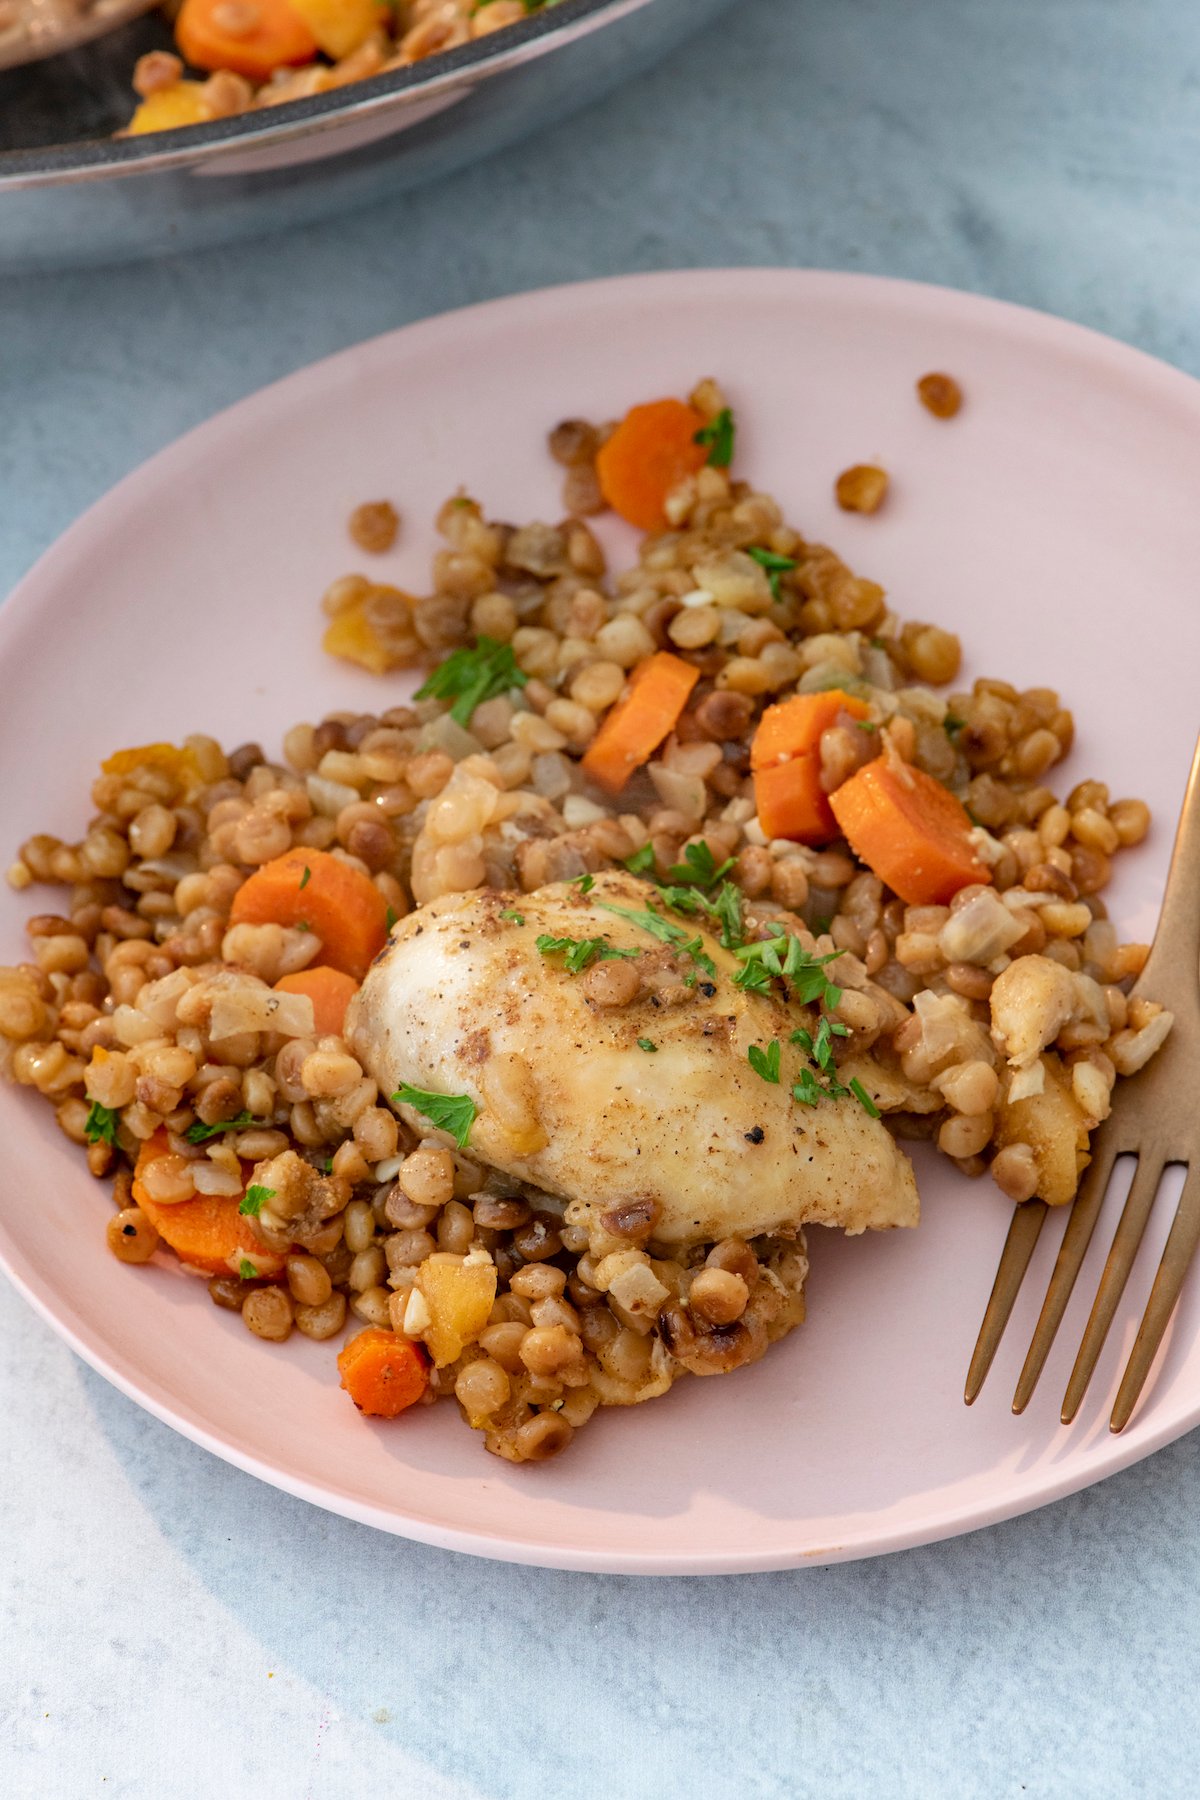 Spiced chicken with toasted couscous on plate.